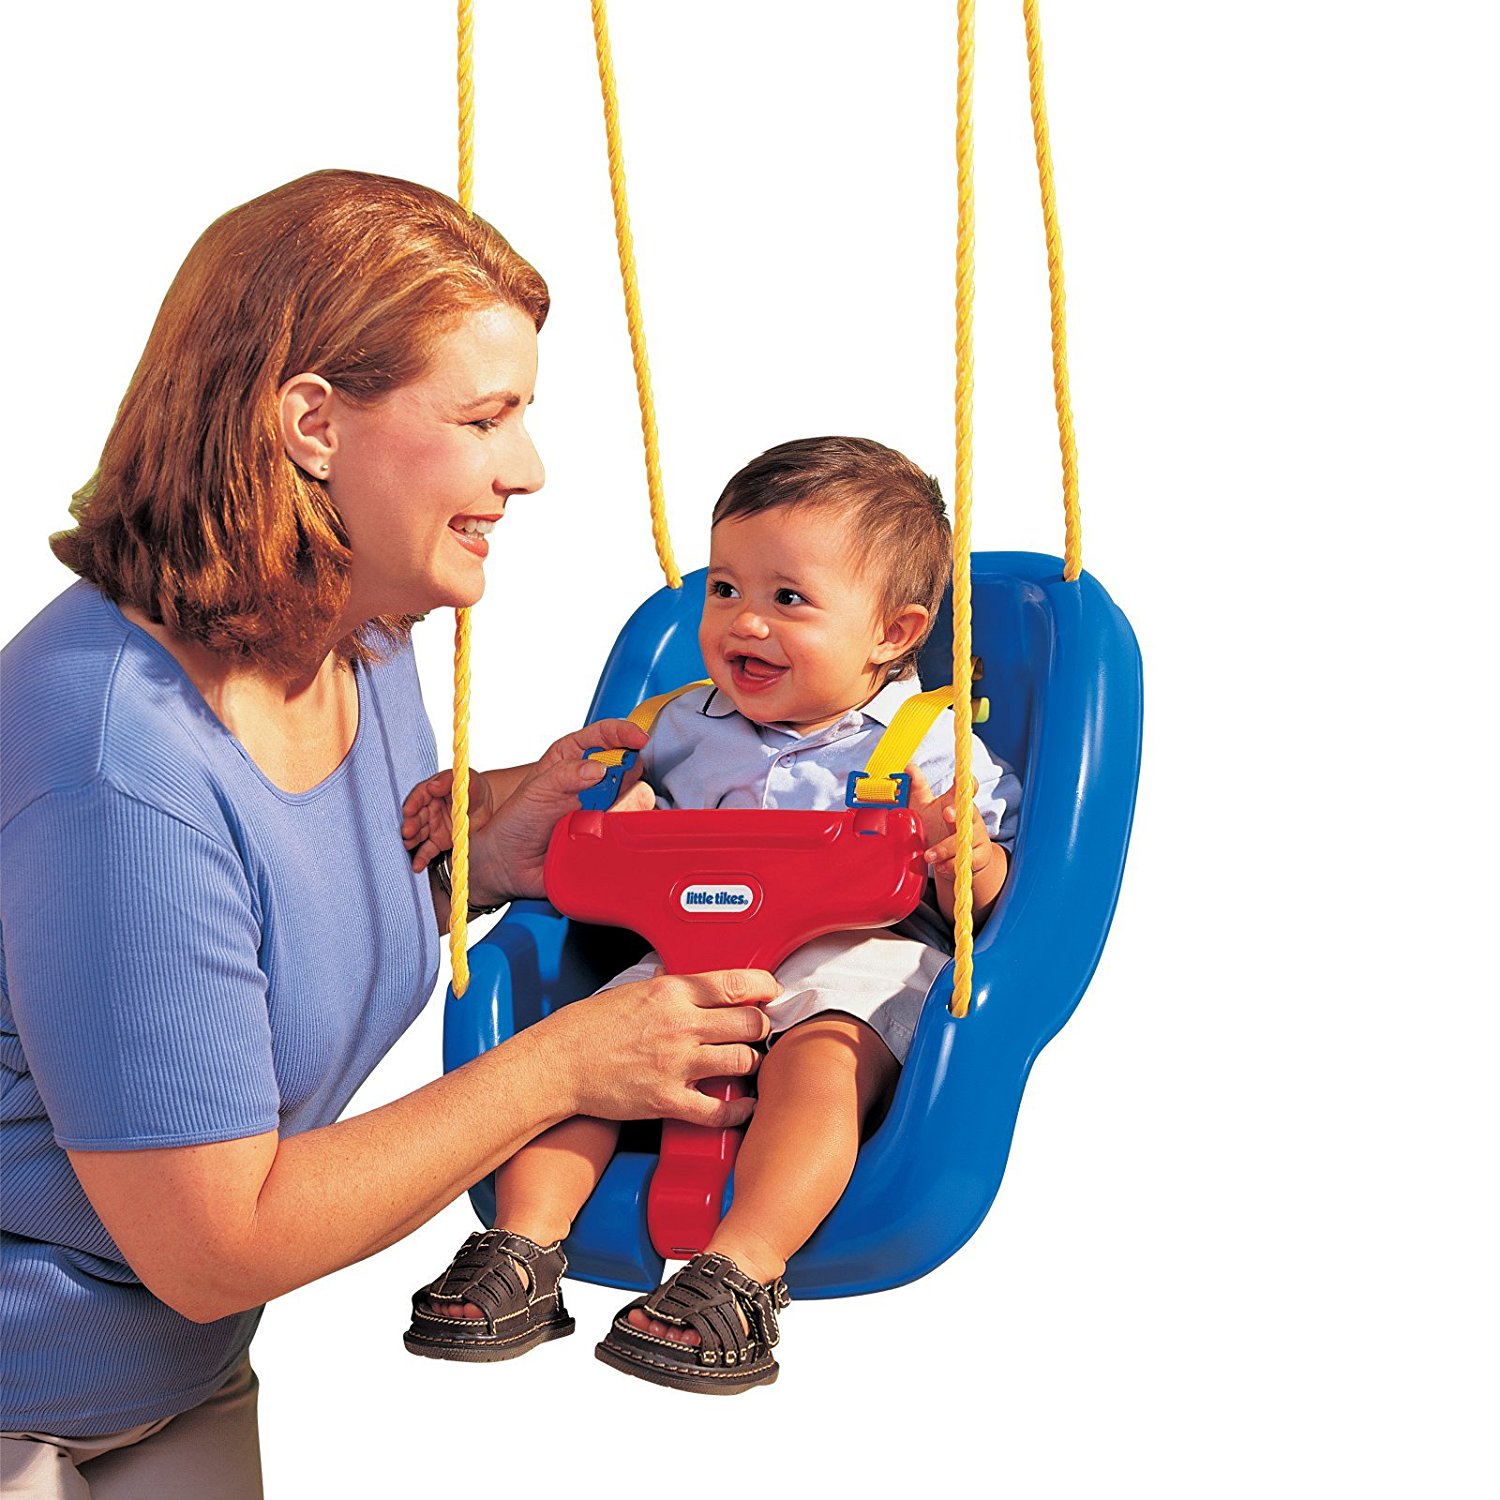 little tikes outdoor toys for toddlers